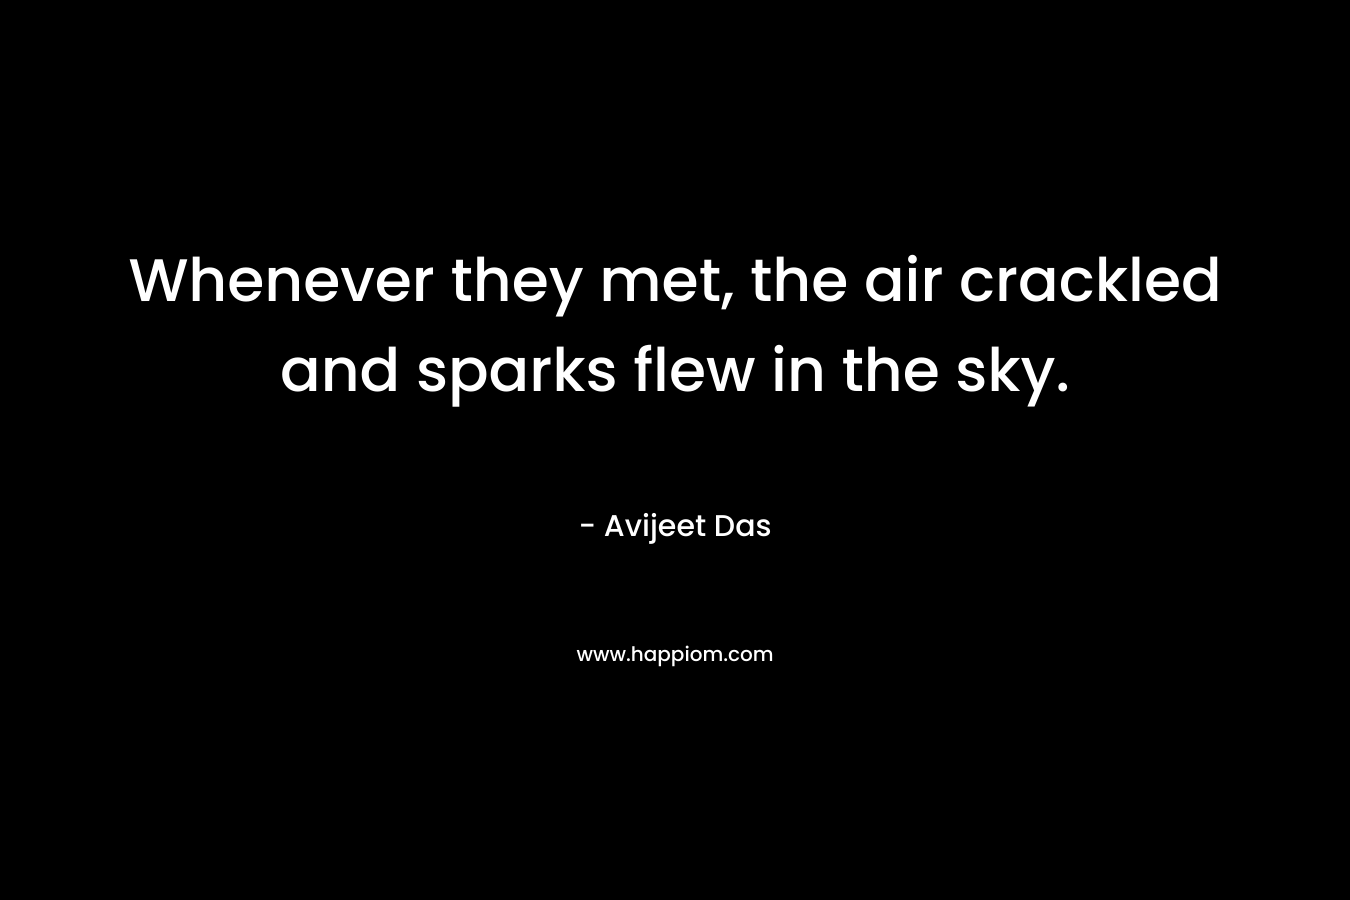 Whenever they met, the air crackled and sparks flew in the sky.